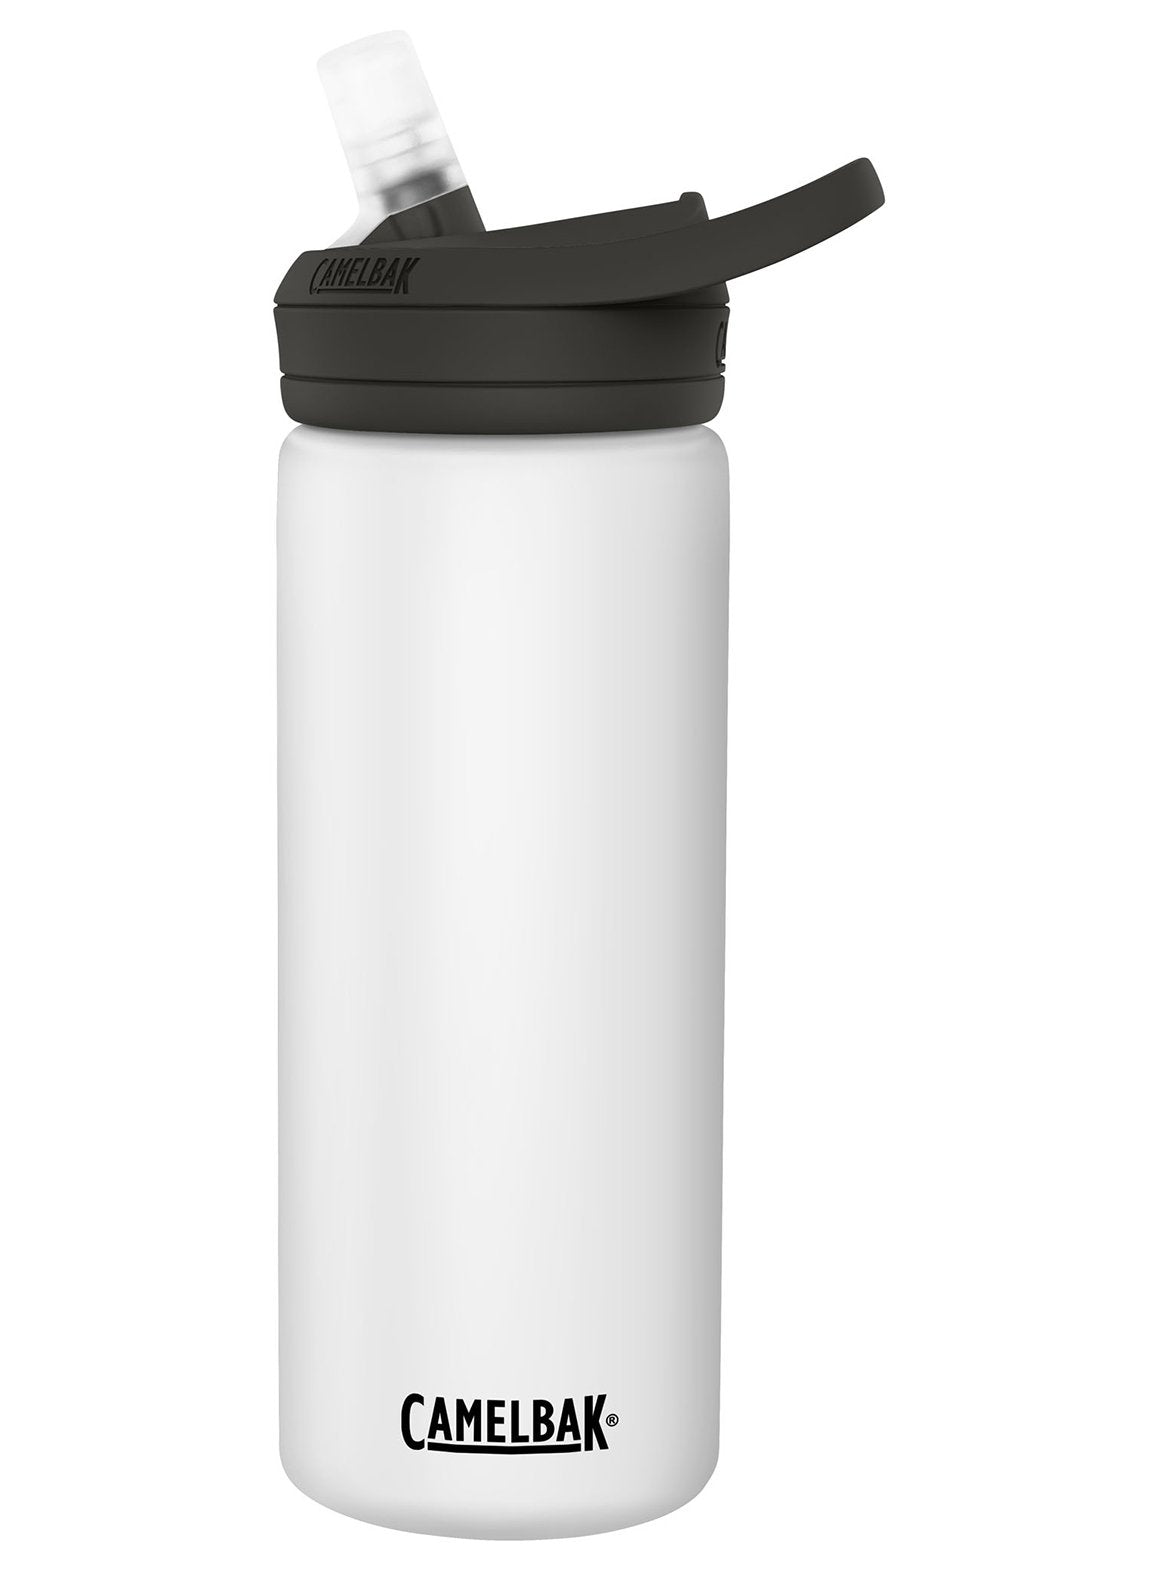 Universal Cycles -- Polar Bottle Sport Insulated Water Bottle - 24 Ounce